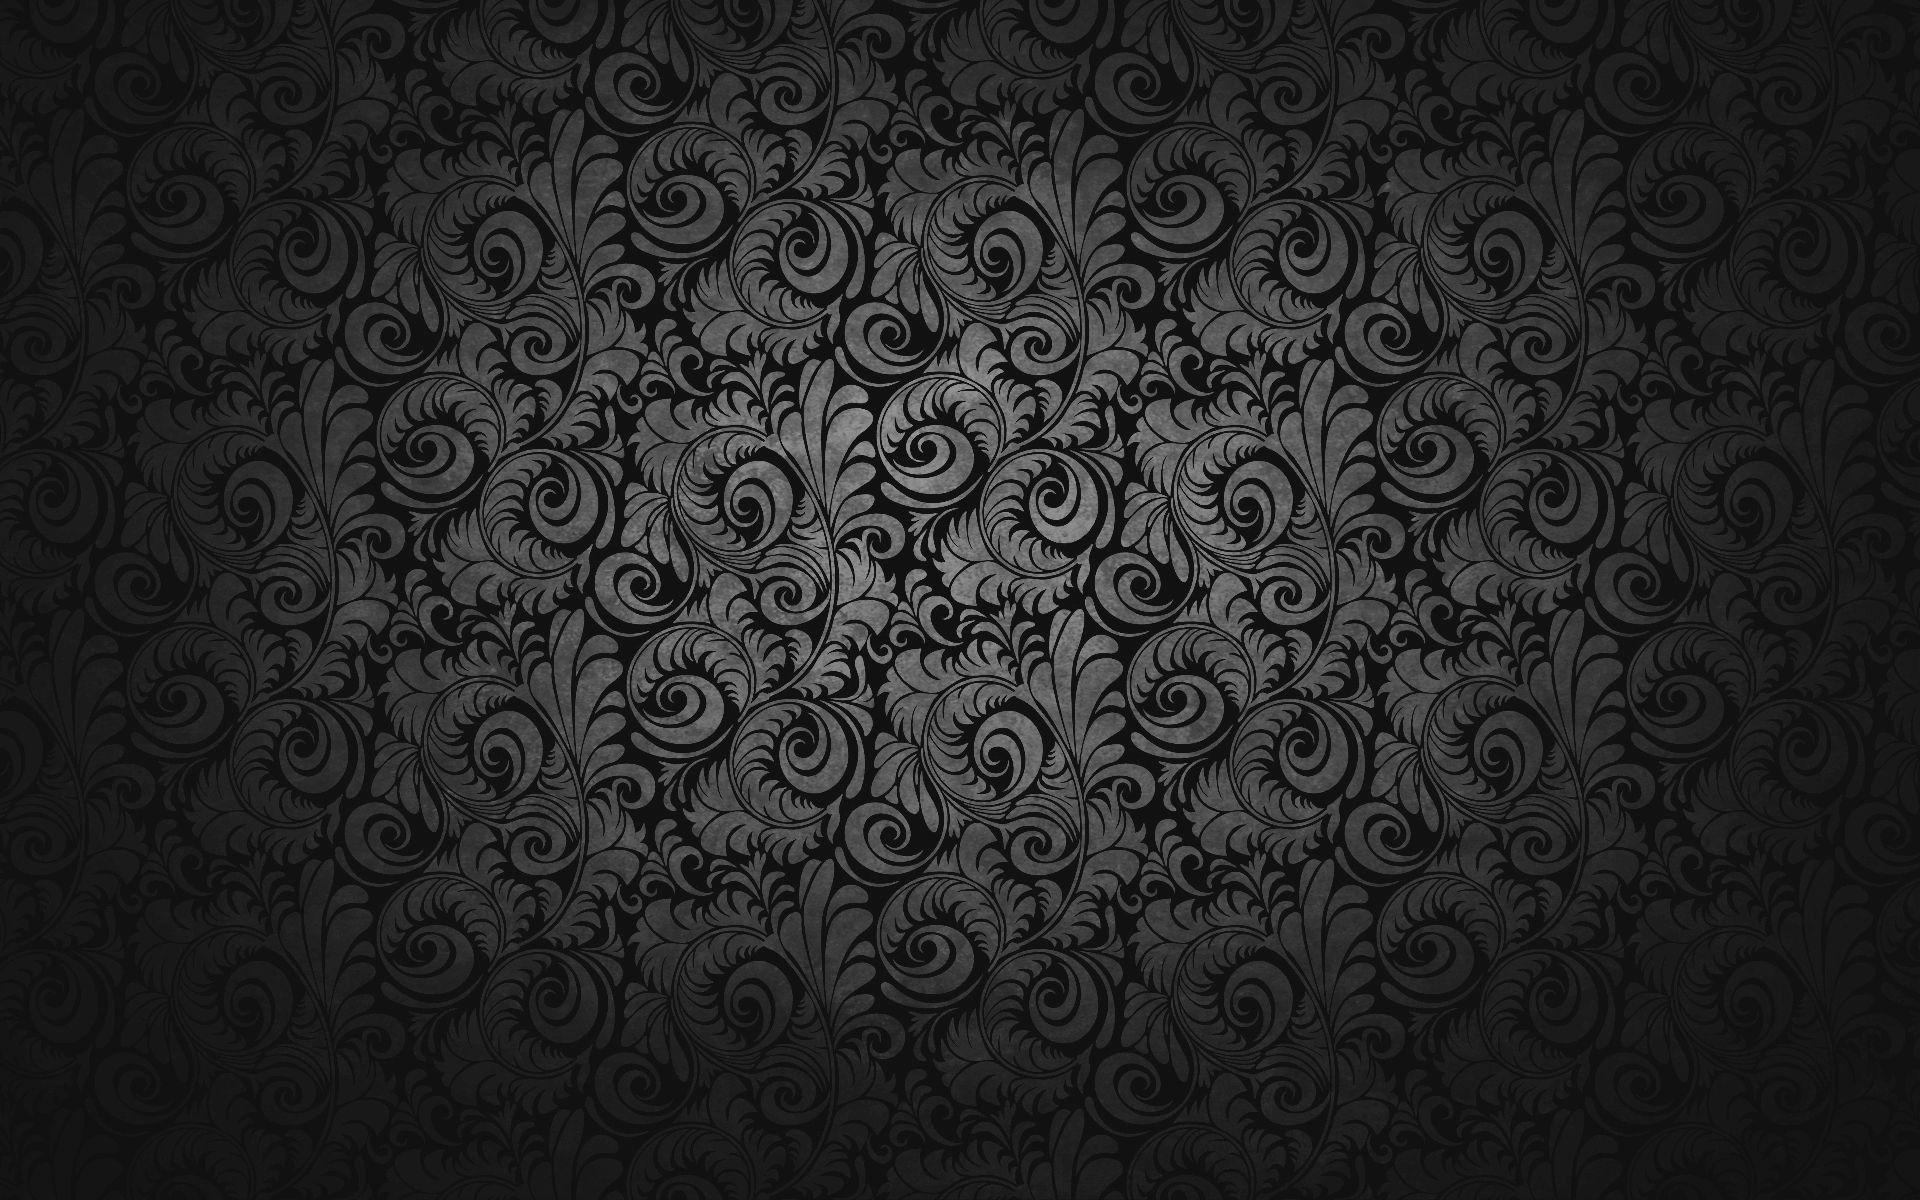 Black feather #Background and or #Wallpaper. Monochrome